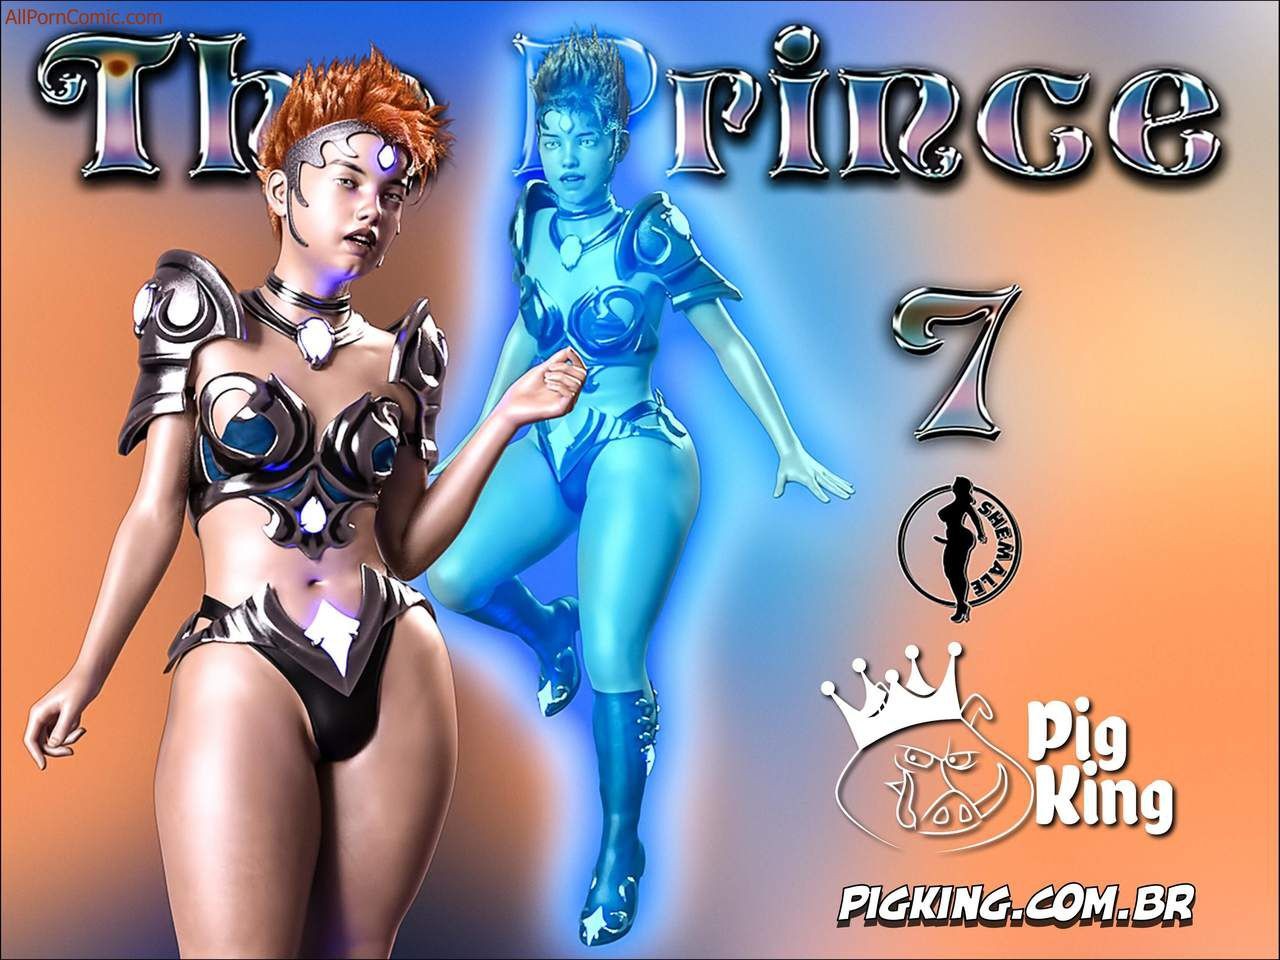 Pee [PigKing] - The Prince 7 Sister